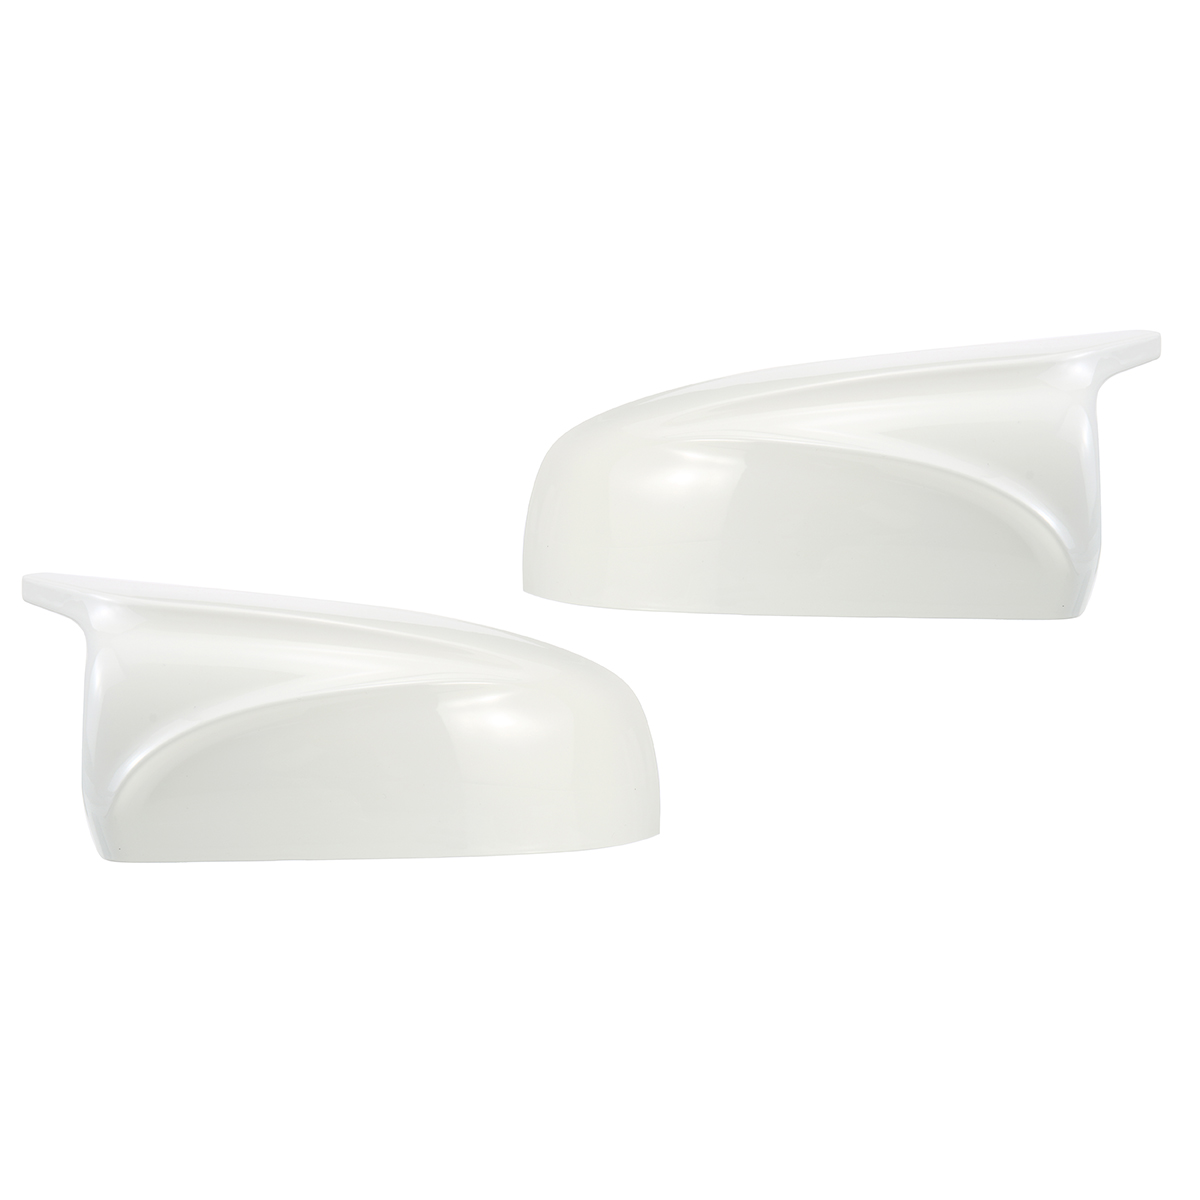 1 Pair Glossy White Rear View Mirror Cap Cover Replacement Left & Right for BMW X5 X6 E70 E71 2007-2013 - Auto GoShop